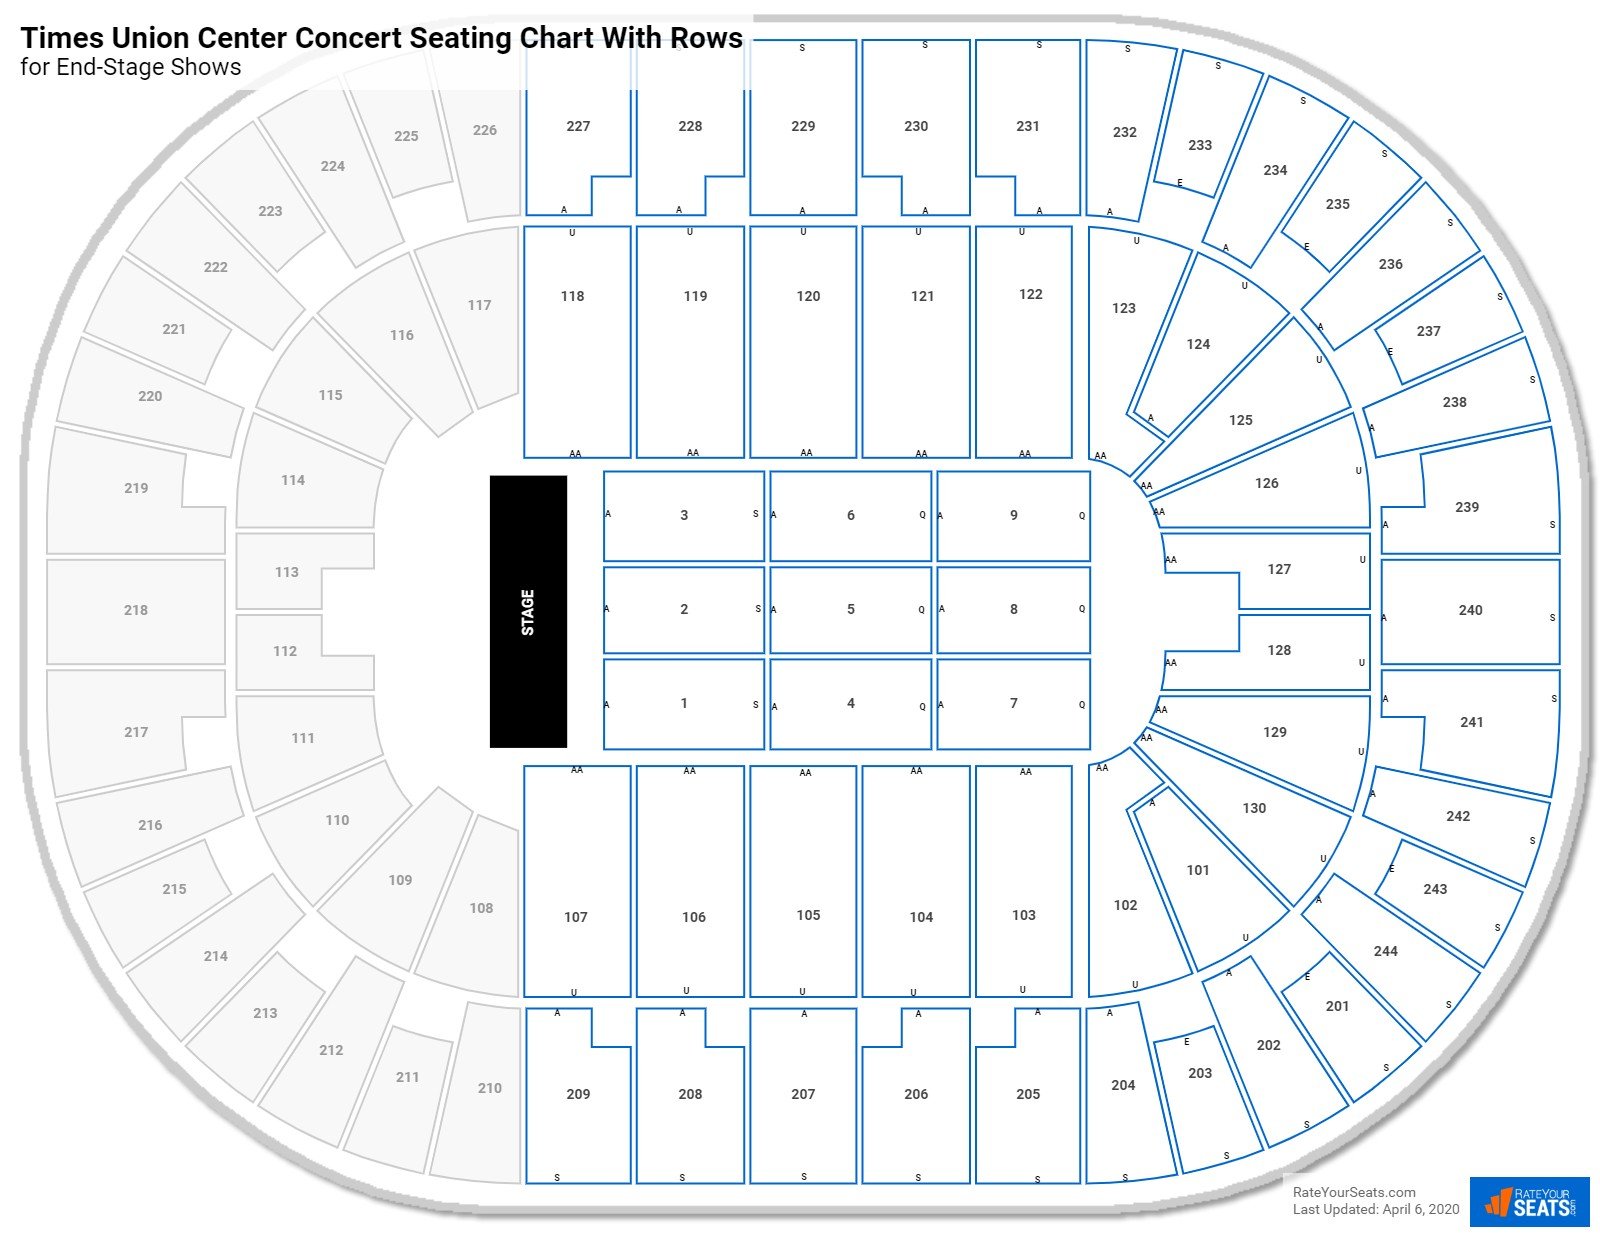 MVP Arena seating chart with row numbers